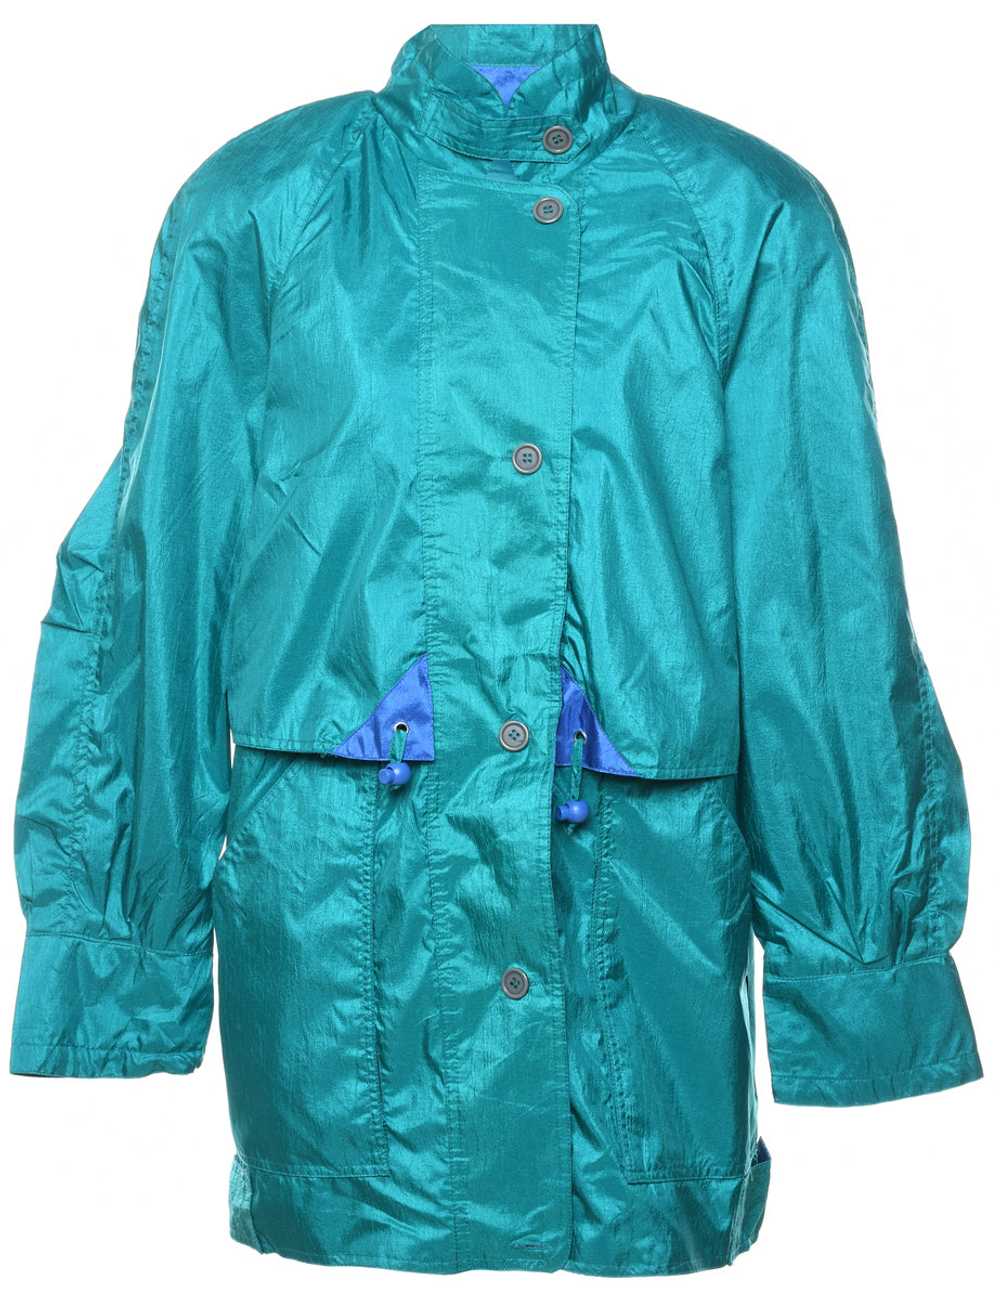 Turquoise & Purple Contrasting Two-Tone Jacket - S - image 1